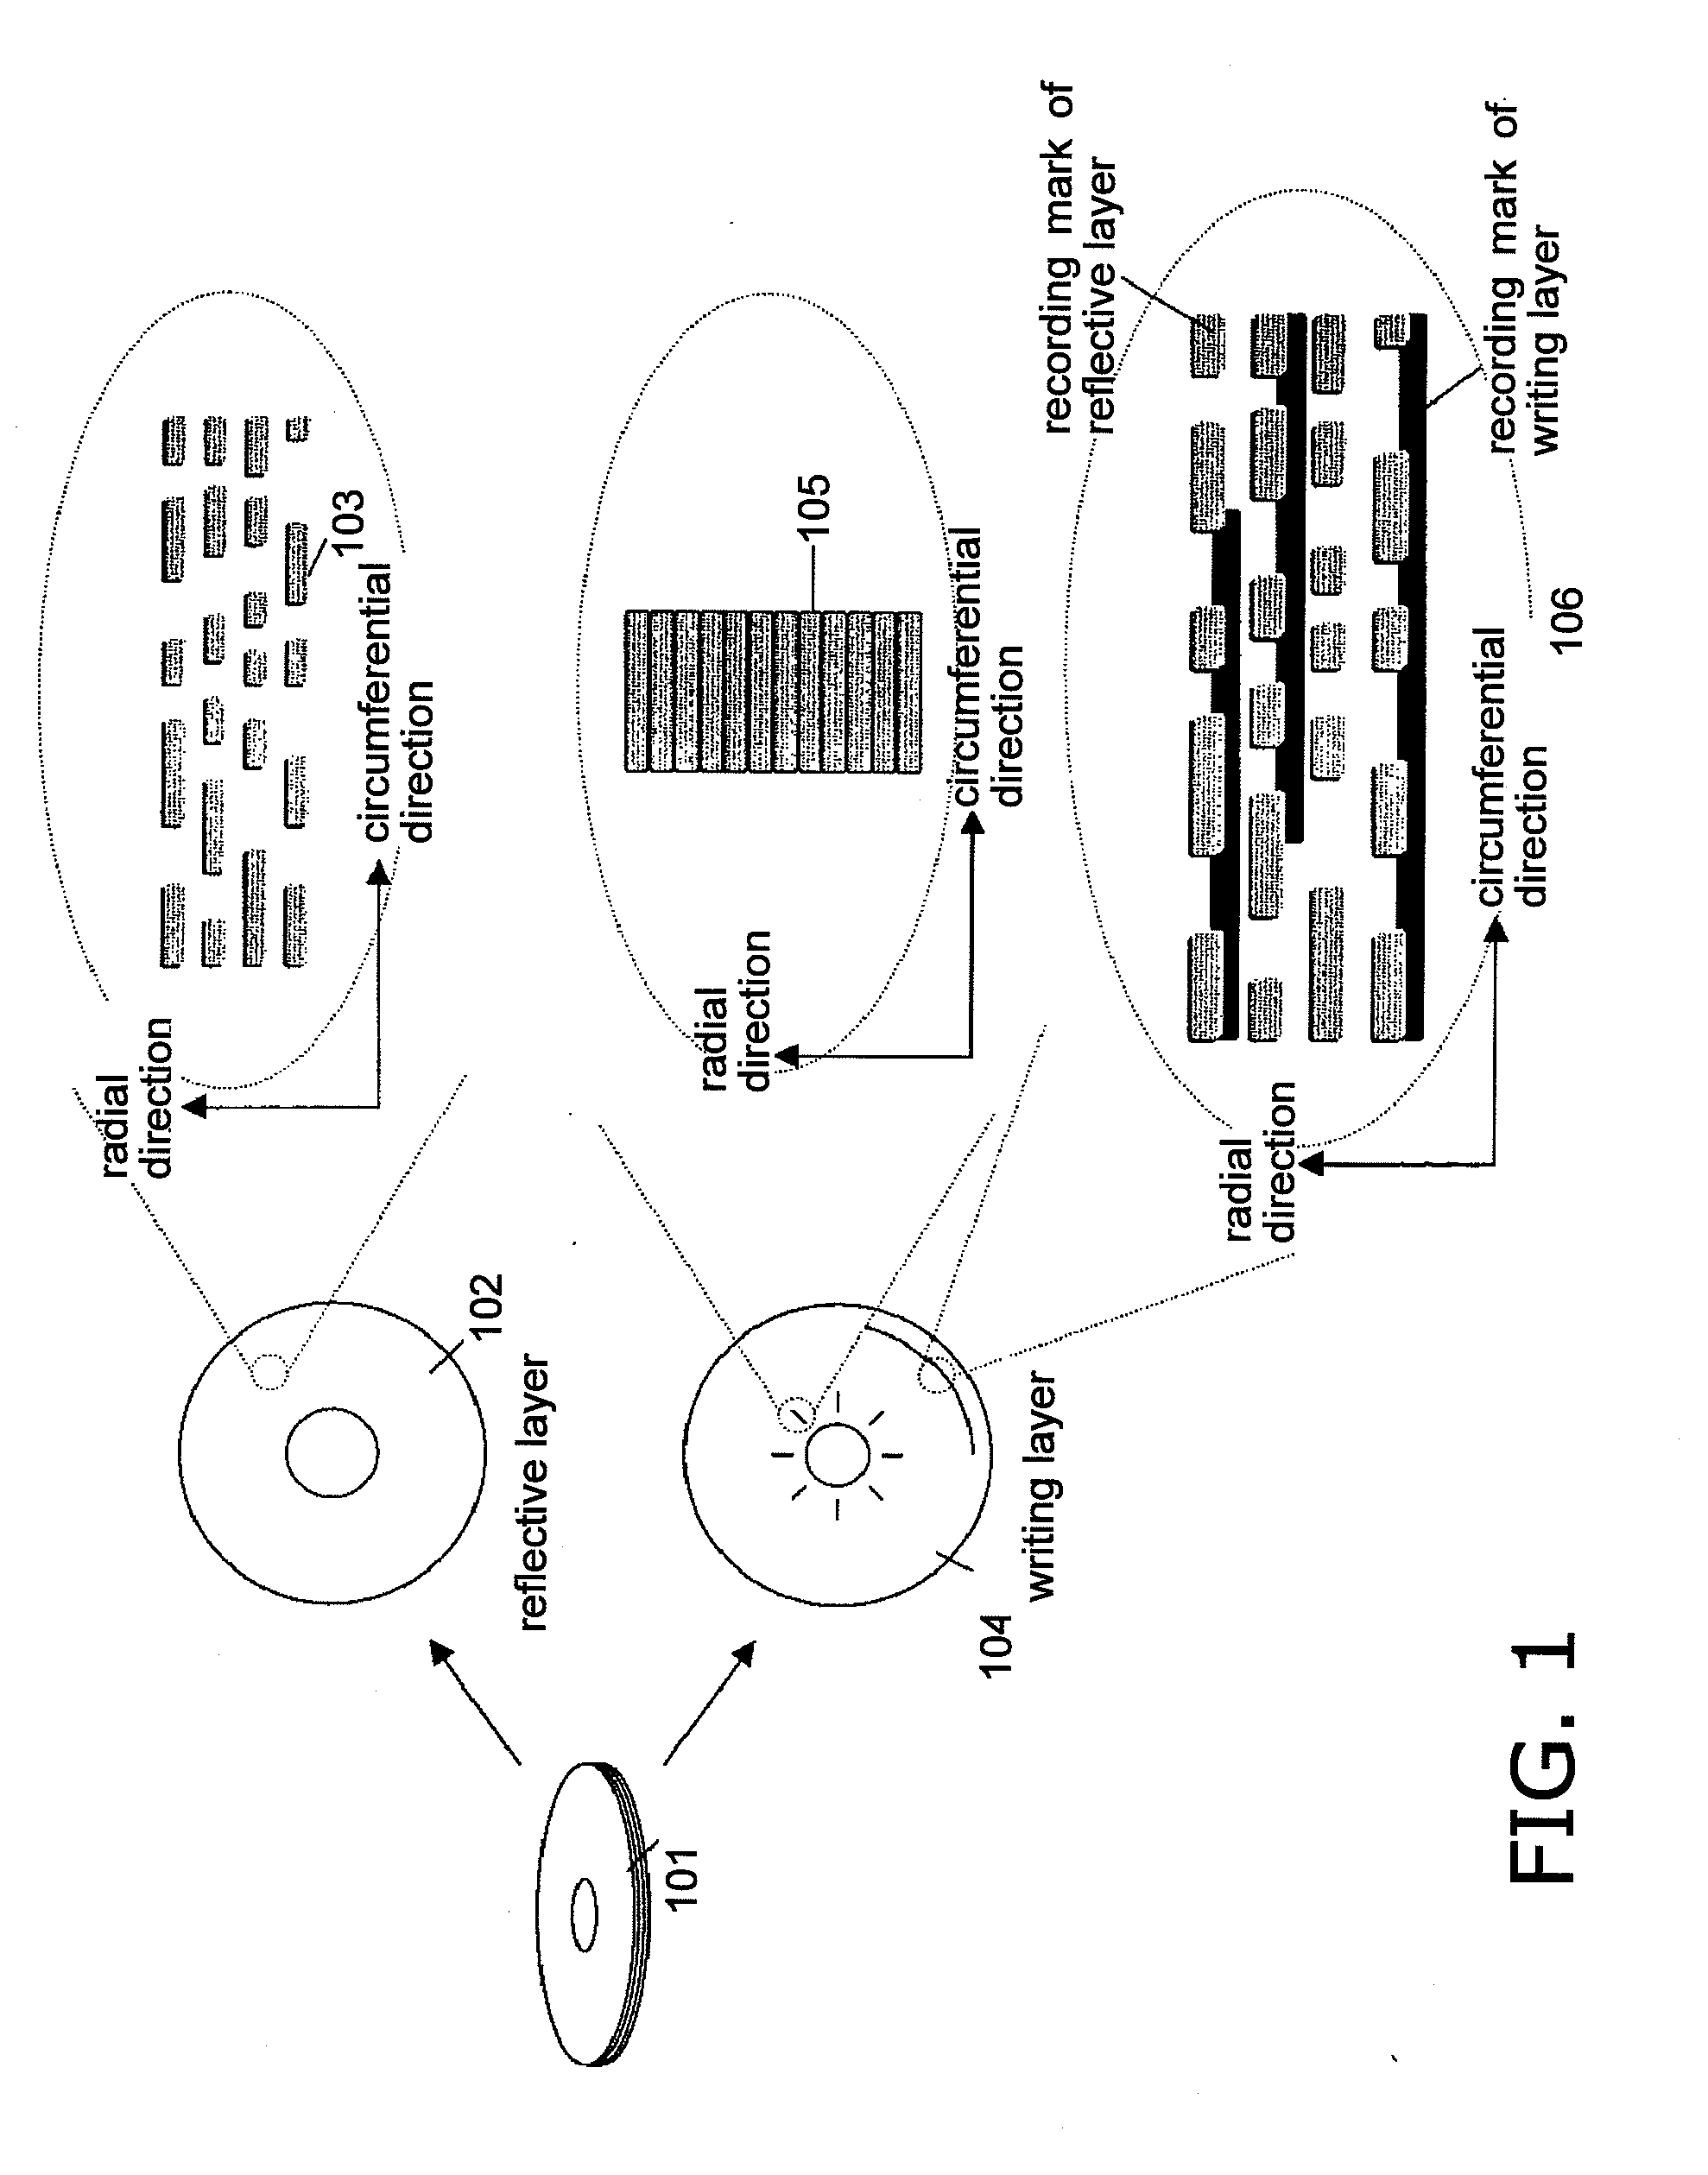 Optical disc, its reproducing device, recording device, manufacturing method, and integrated circuit